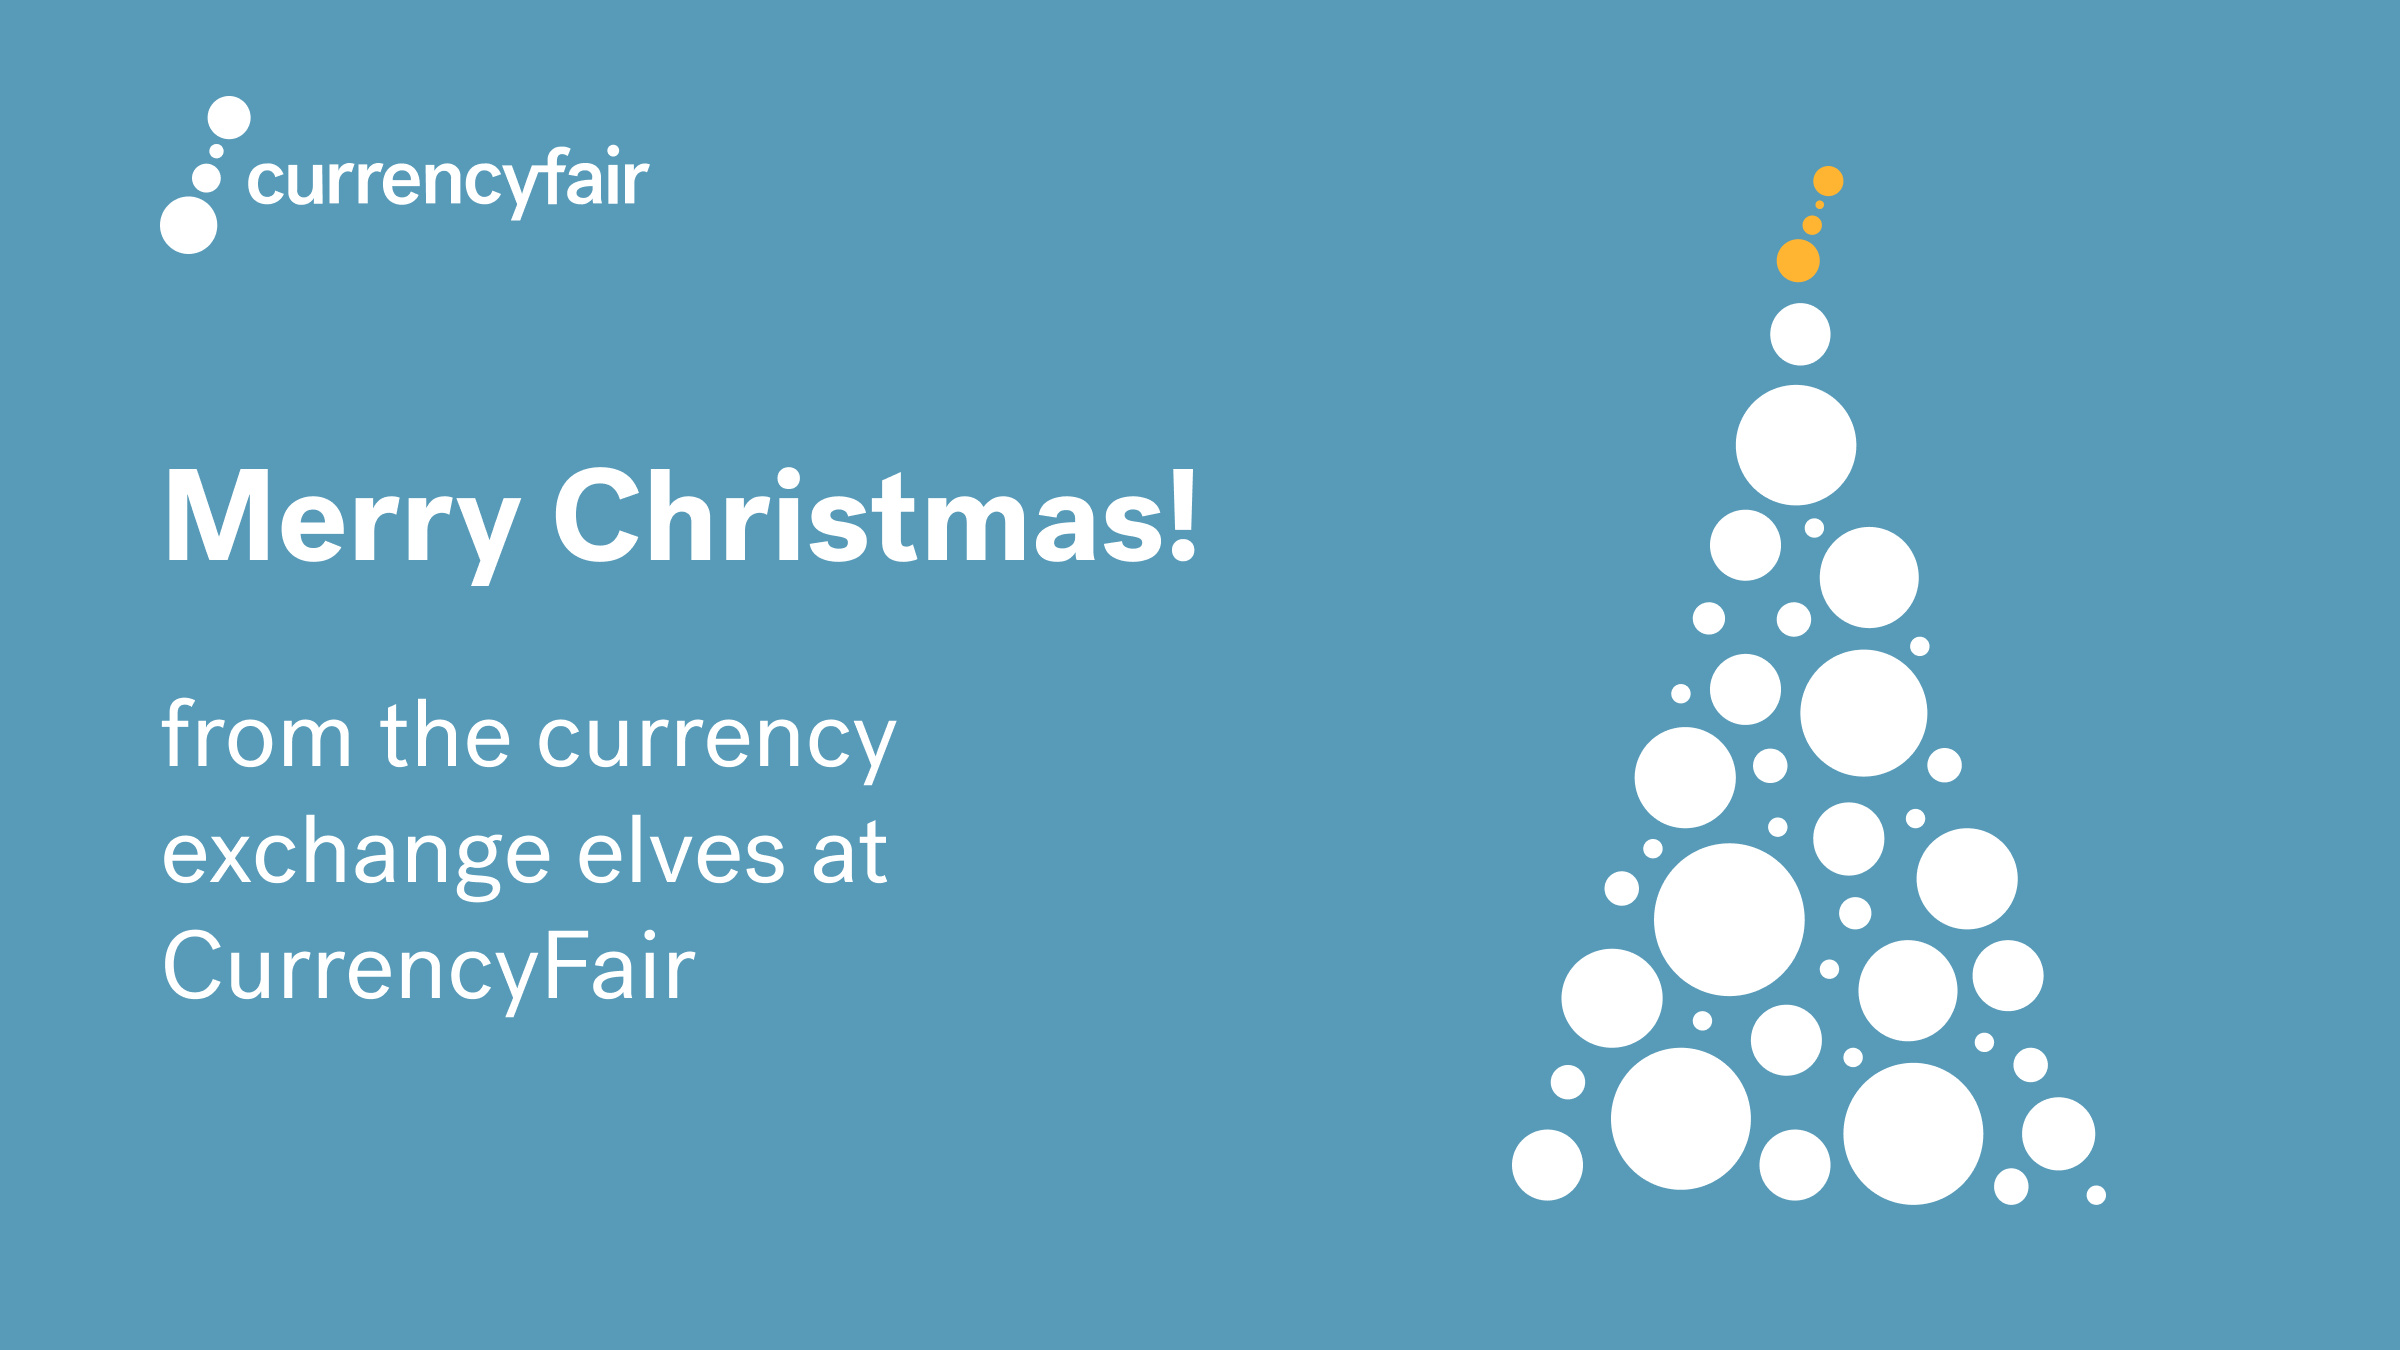 CurrencyFair (@CurrencyFair) / Twitter